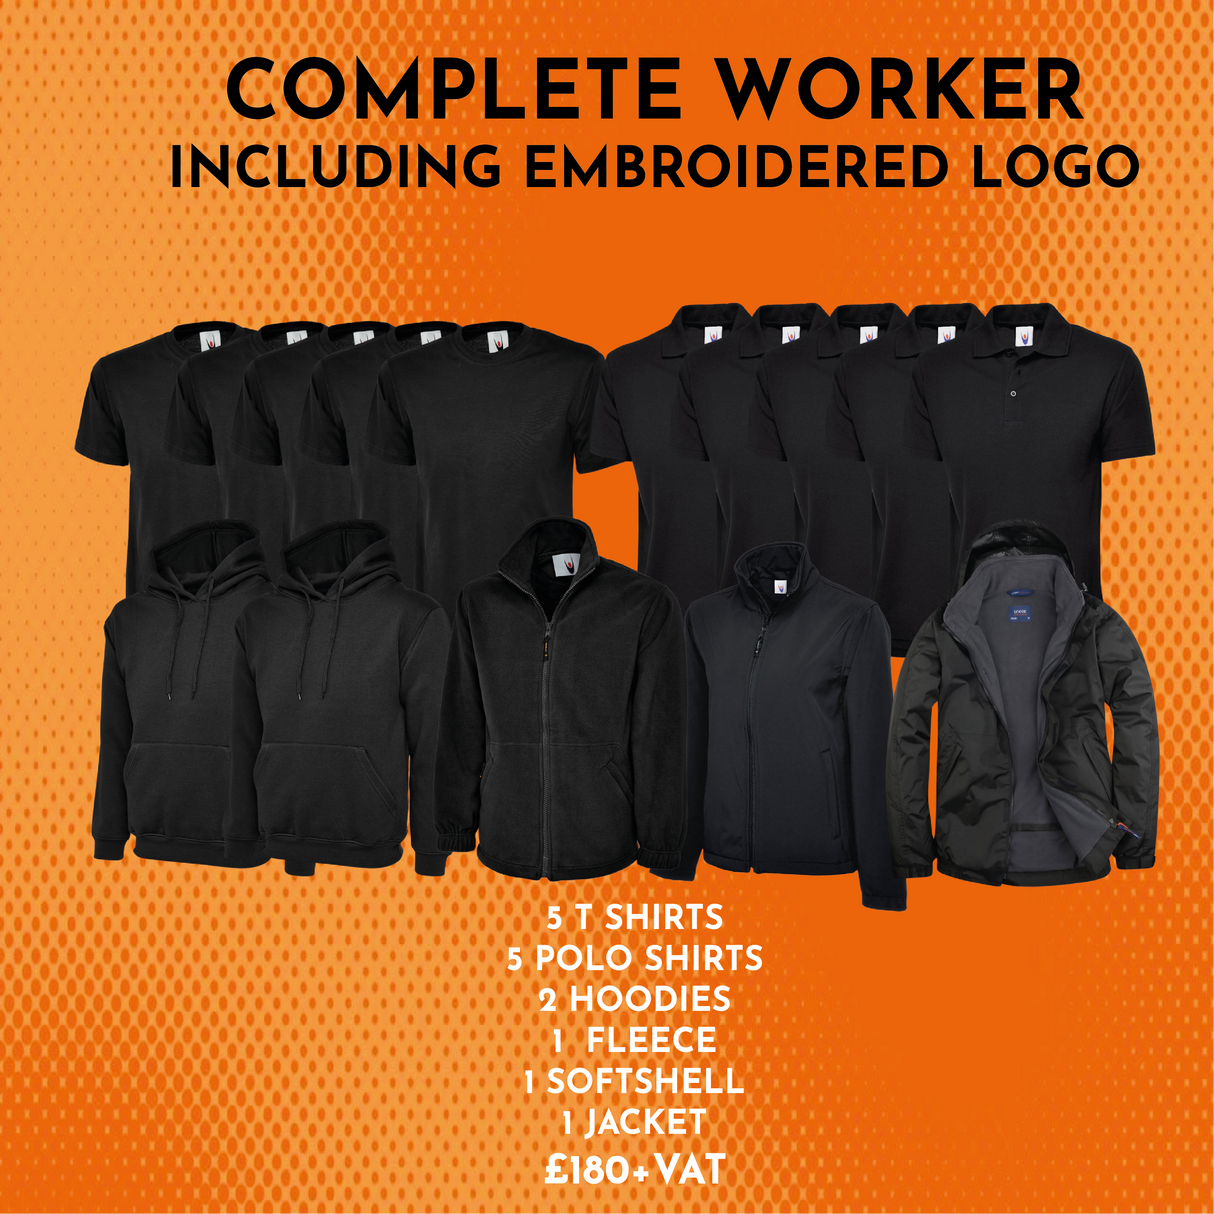 Complete Worker Package